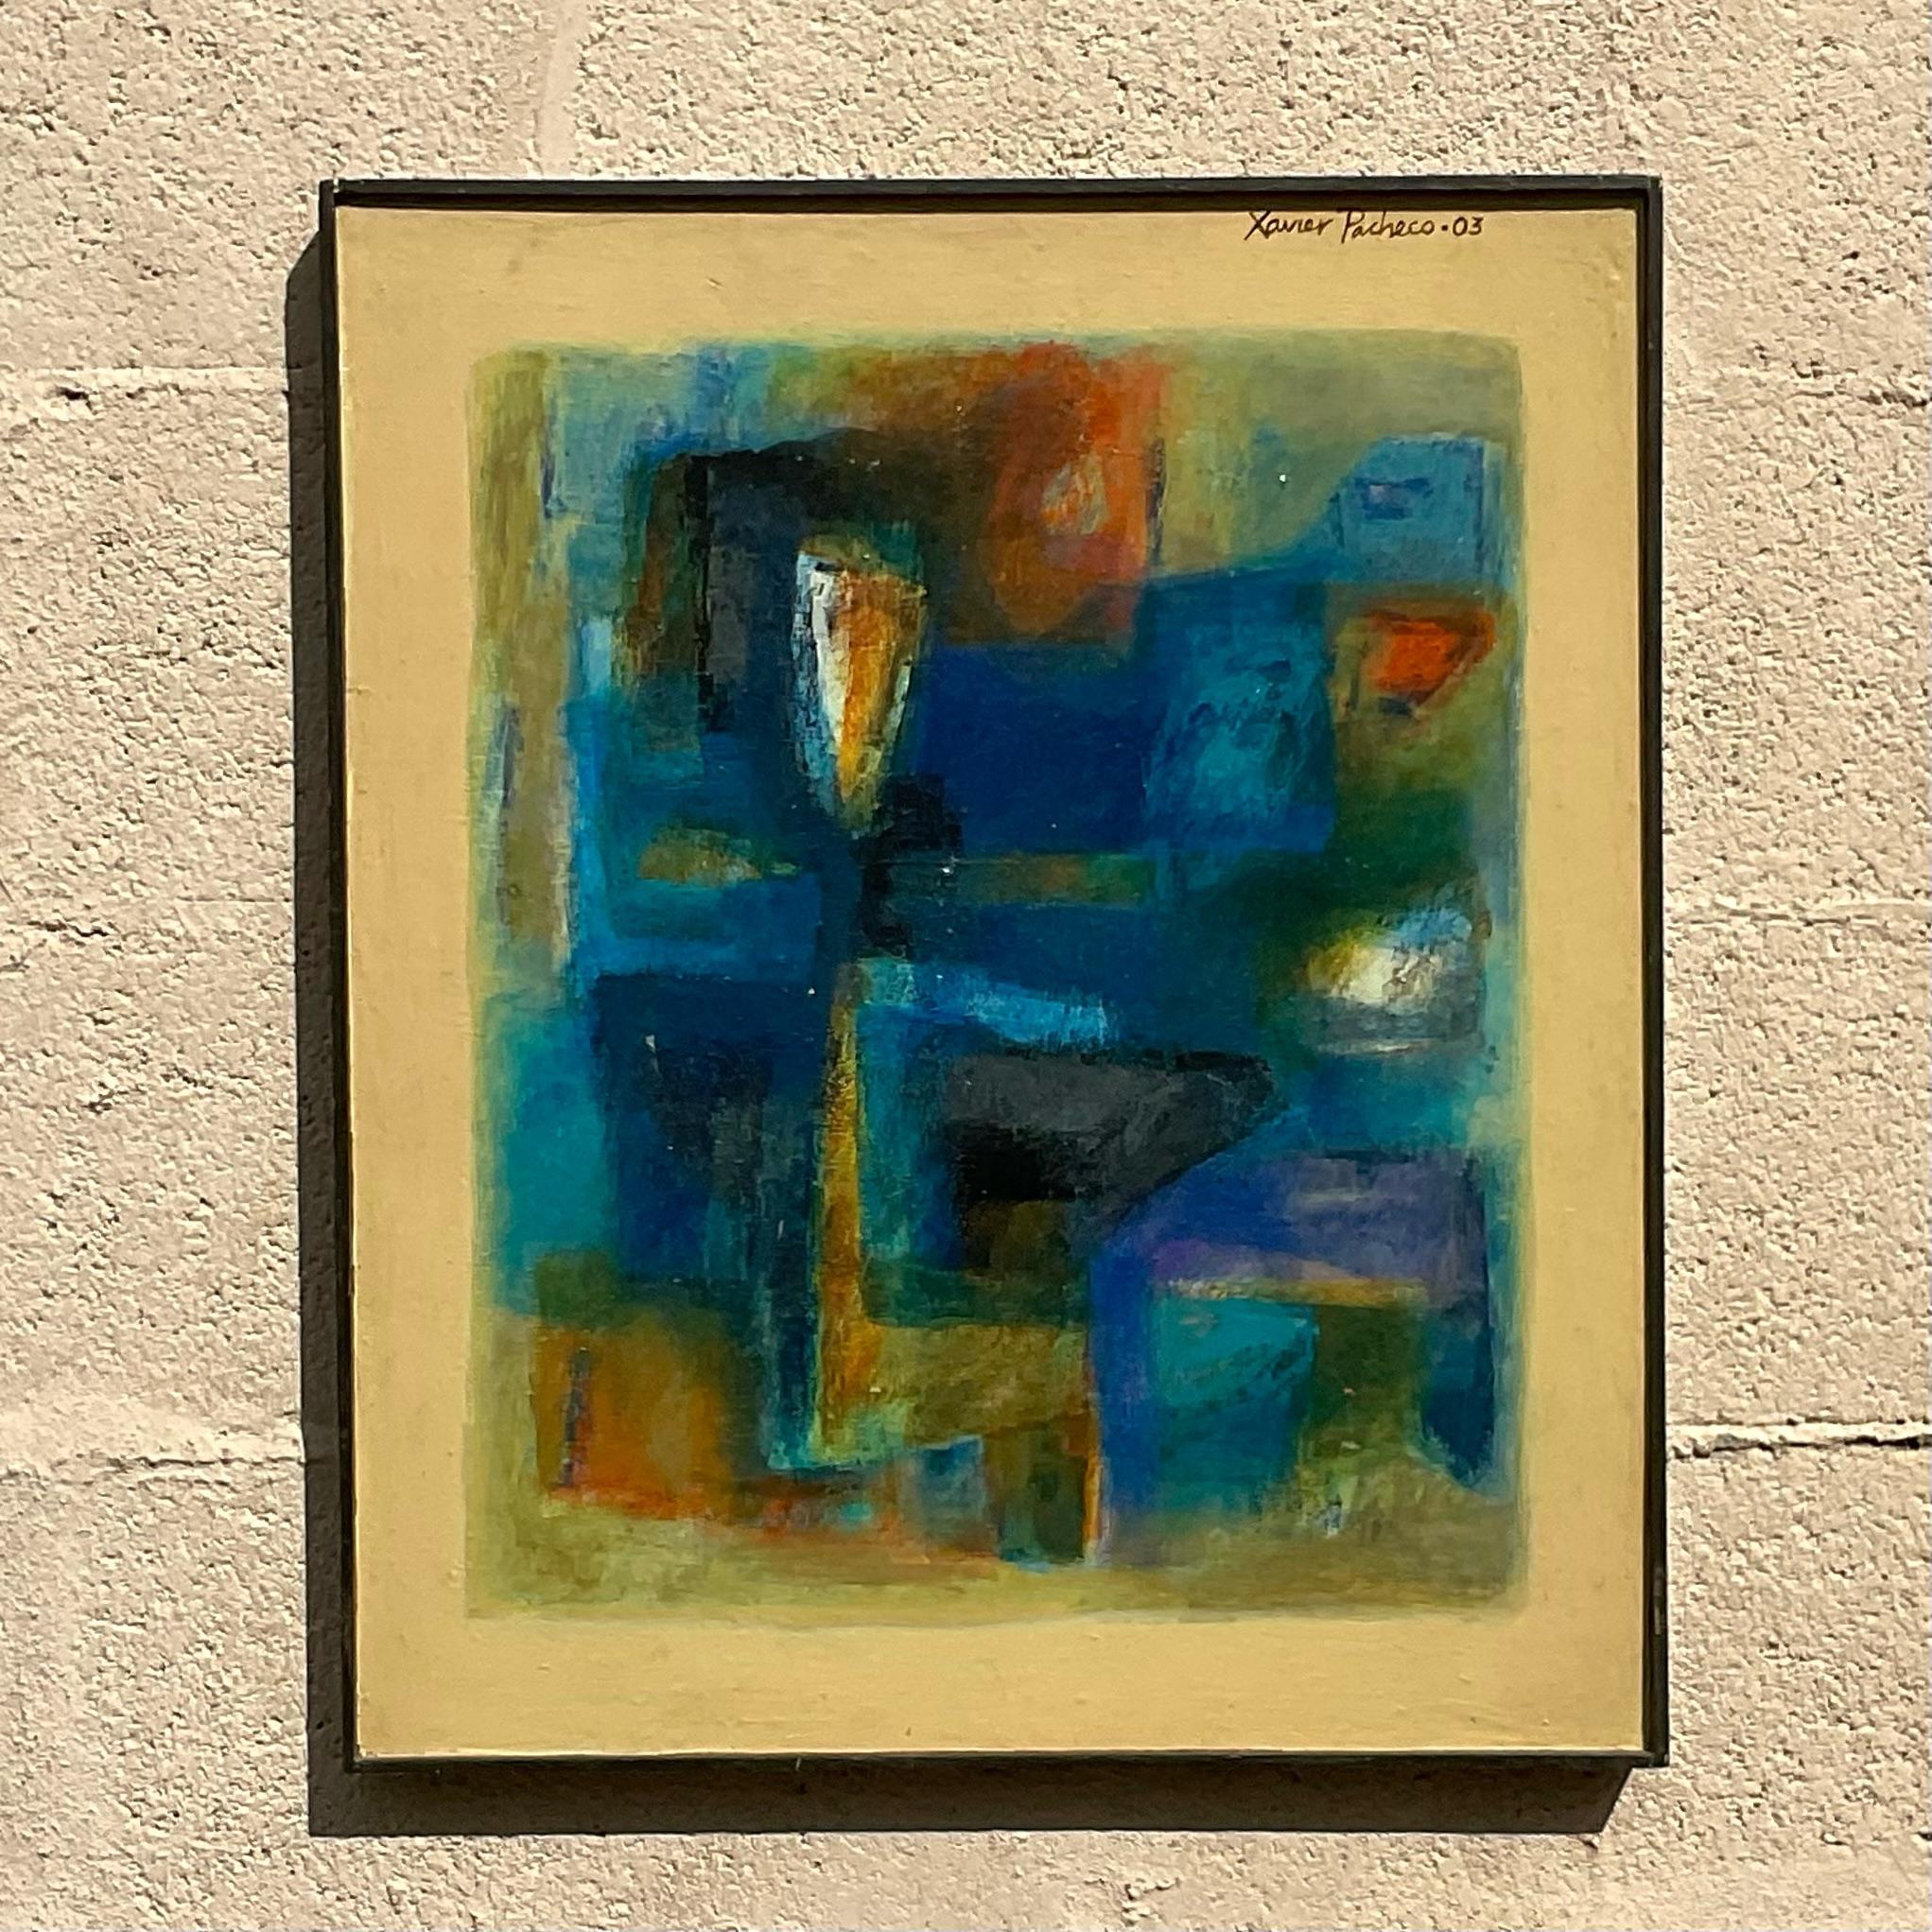 Vintage abstract geometric painting. Beautiful combination of contrasting cool and warm colors harmoniously blended with an air of old and new. Signed by the artist. Acquired from a Philadelphia estate.